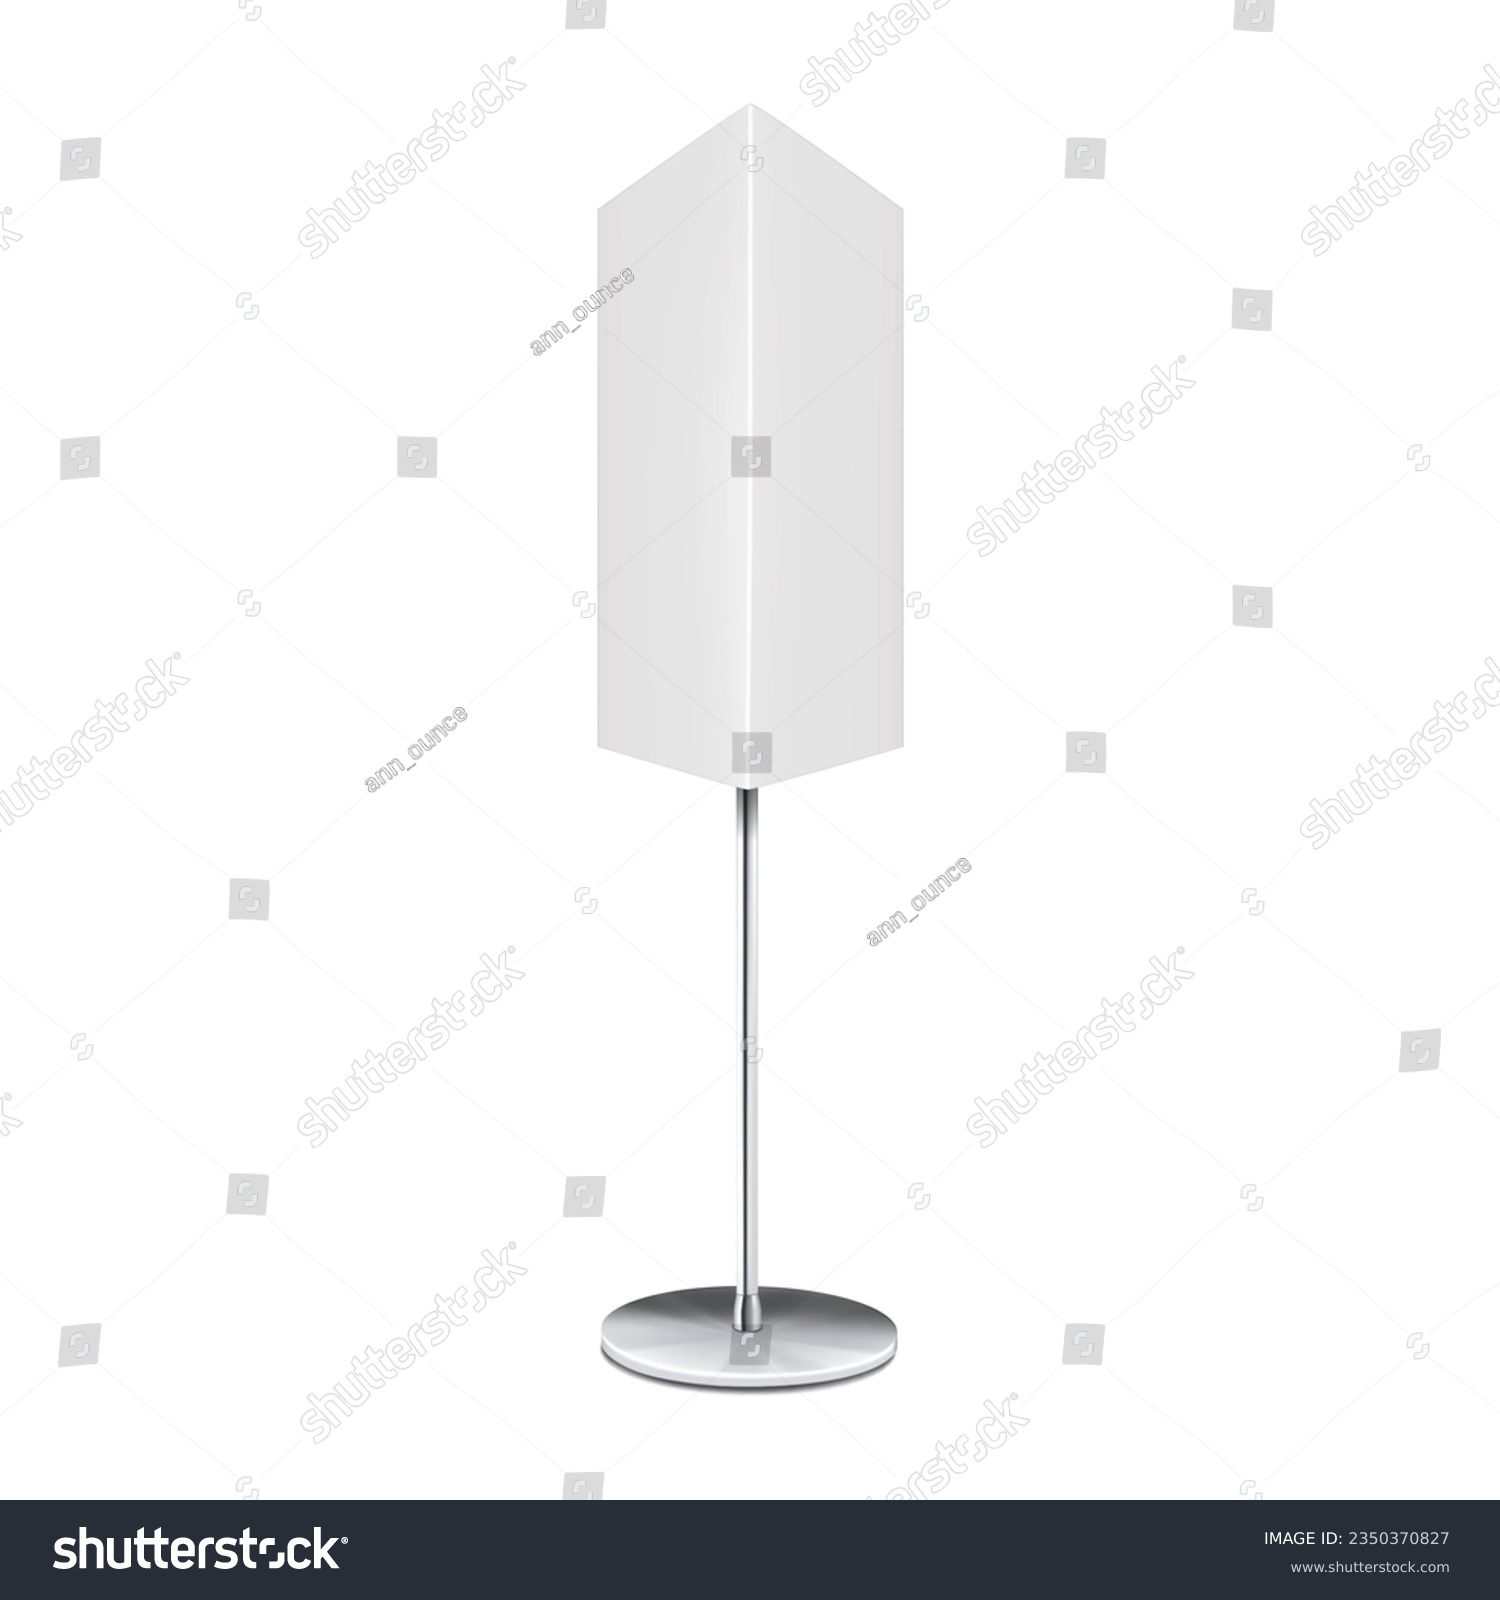 Rotating 3 sided banner stand realistic vector mockup. White blank pole sign. Triangular graphic panel display board mock-up. Template for design #2350370827